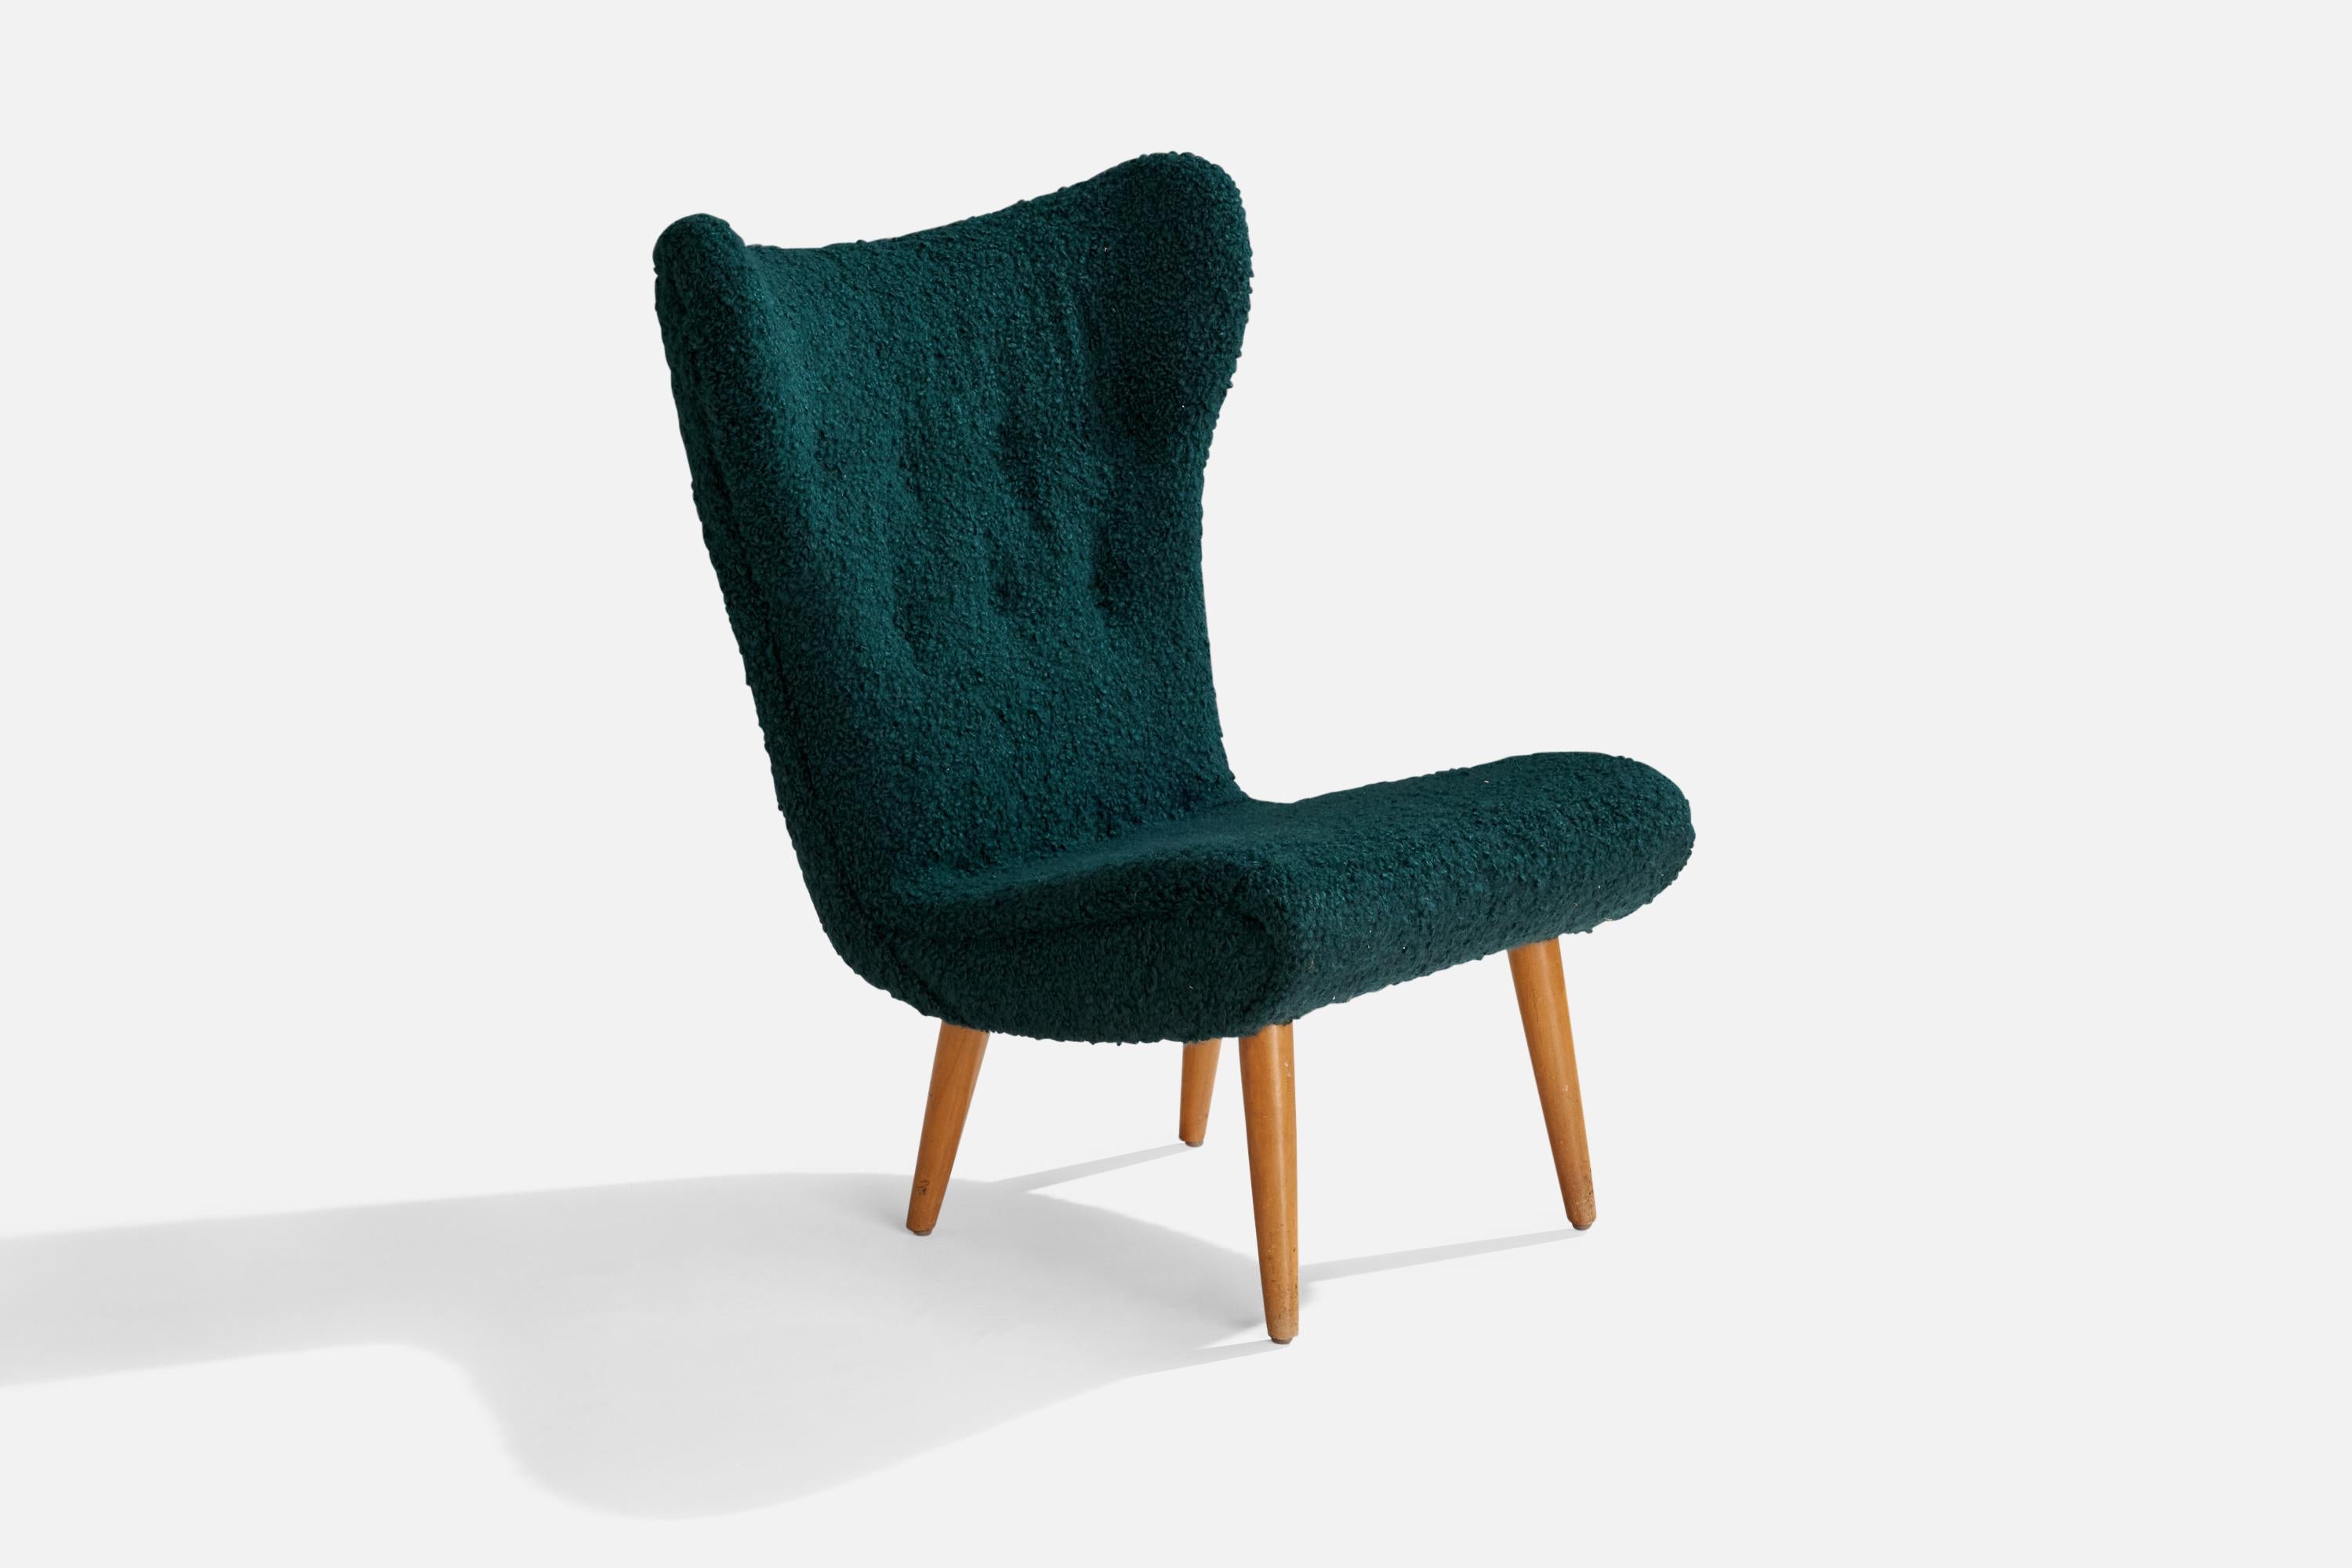 A wood and blue bouclé fabric slipper lounge chair designed and produced in Sweden, c. 1950s.

Reupholstered in brand new fabric.
Seat height: 16”